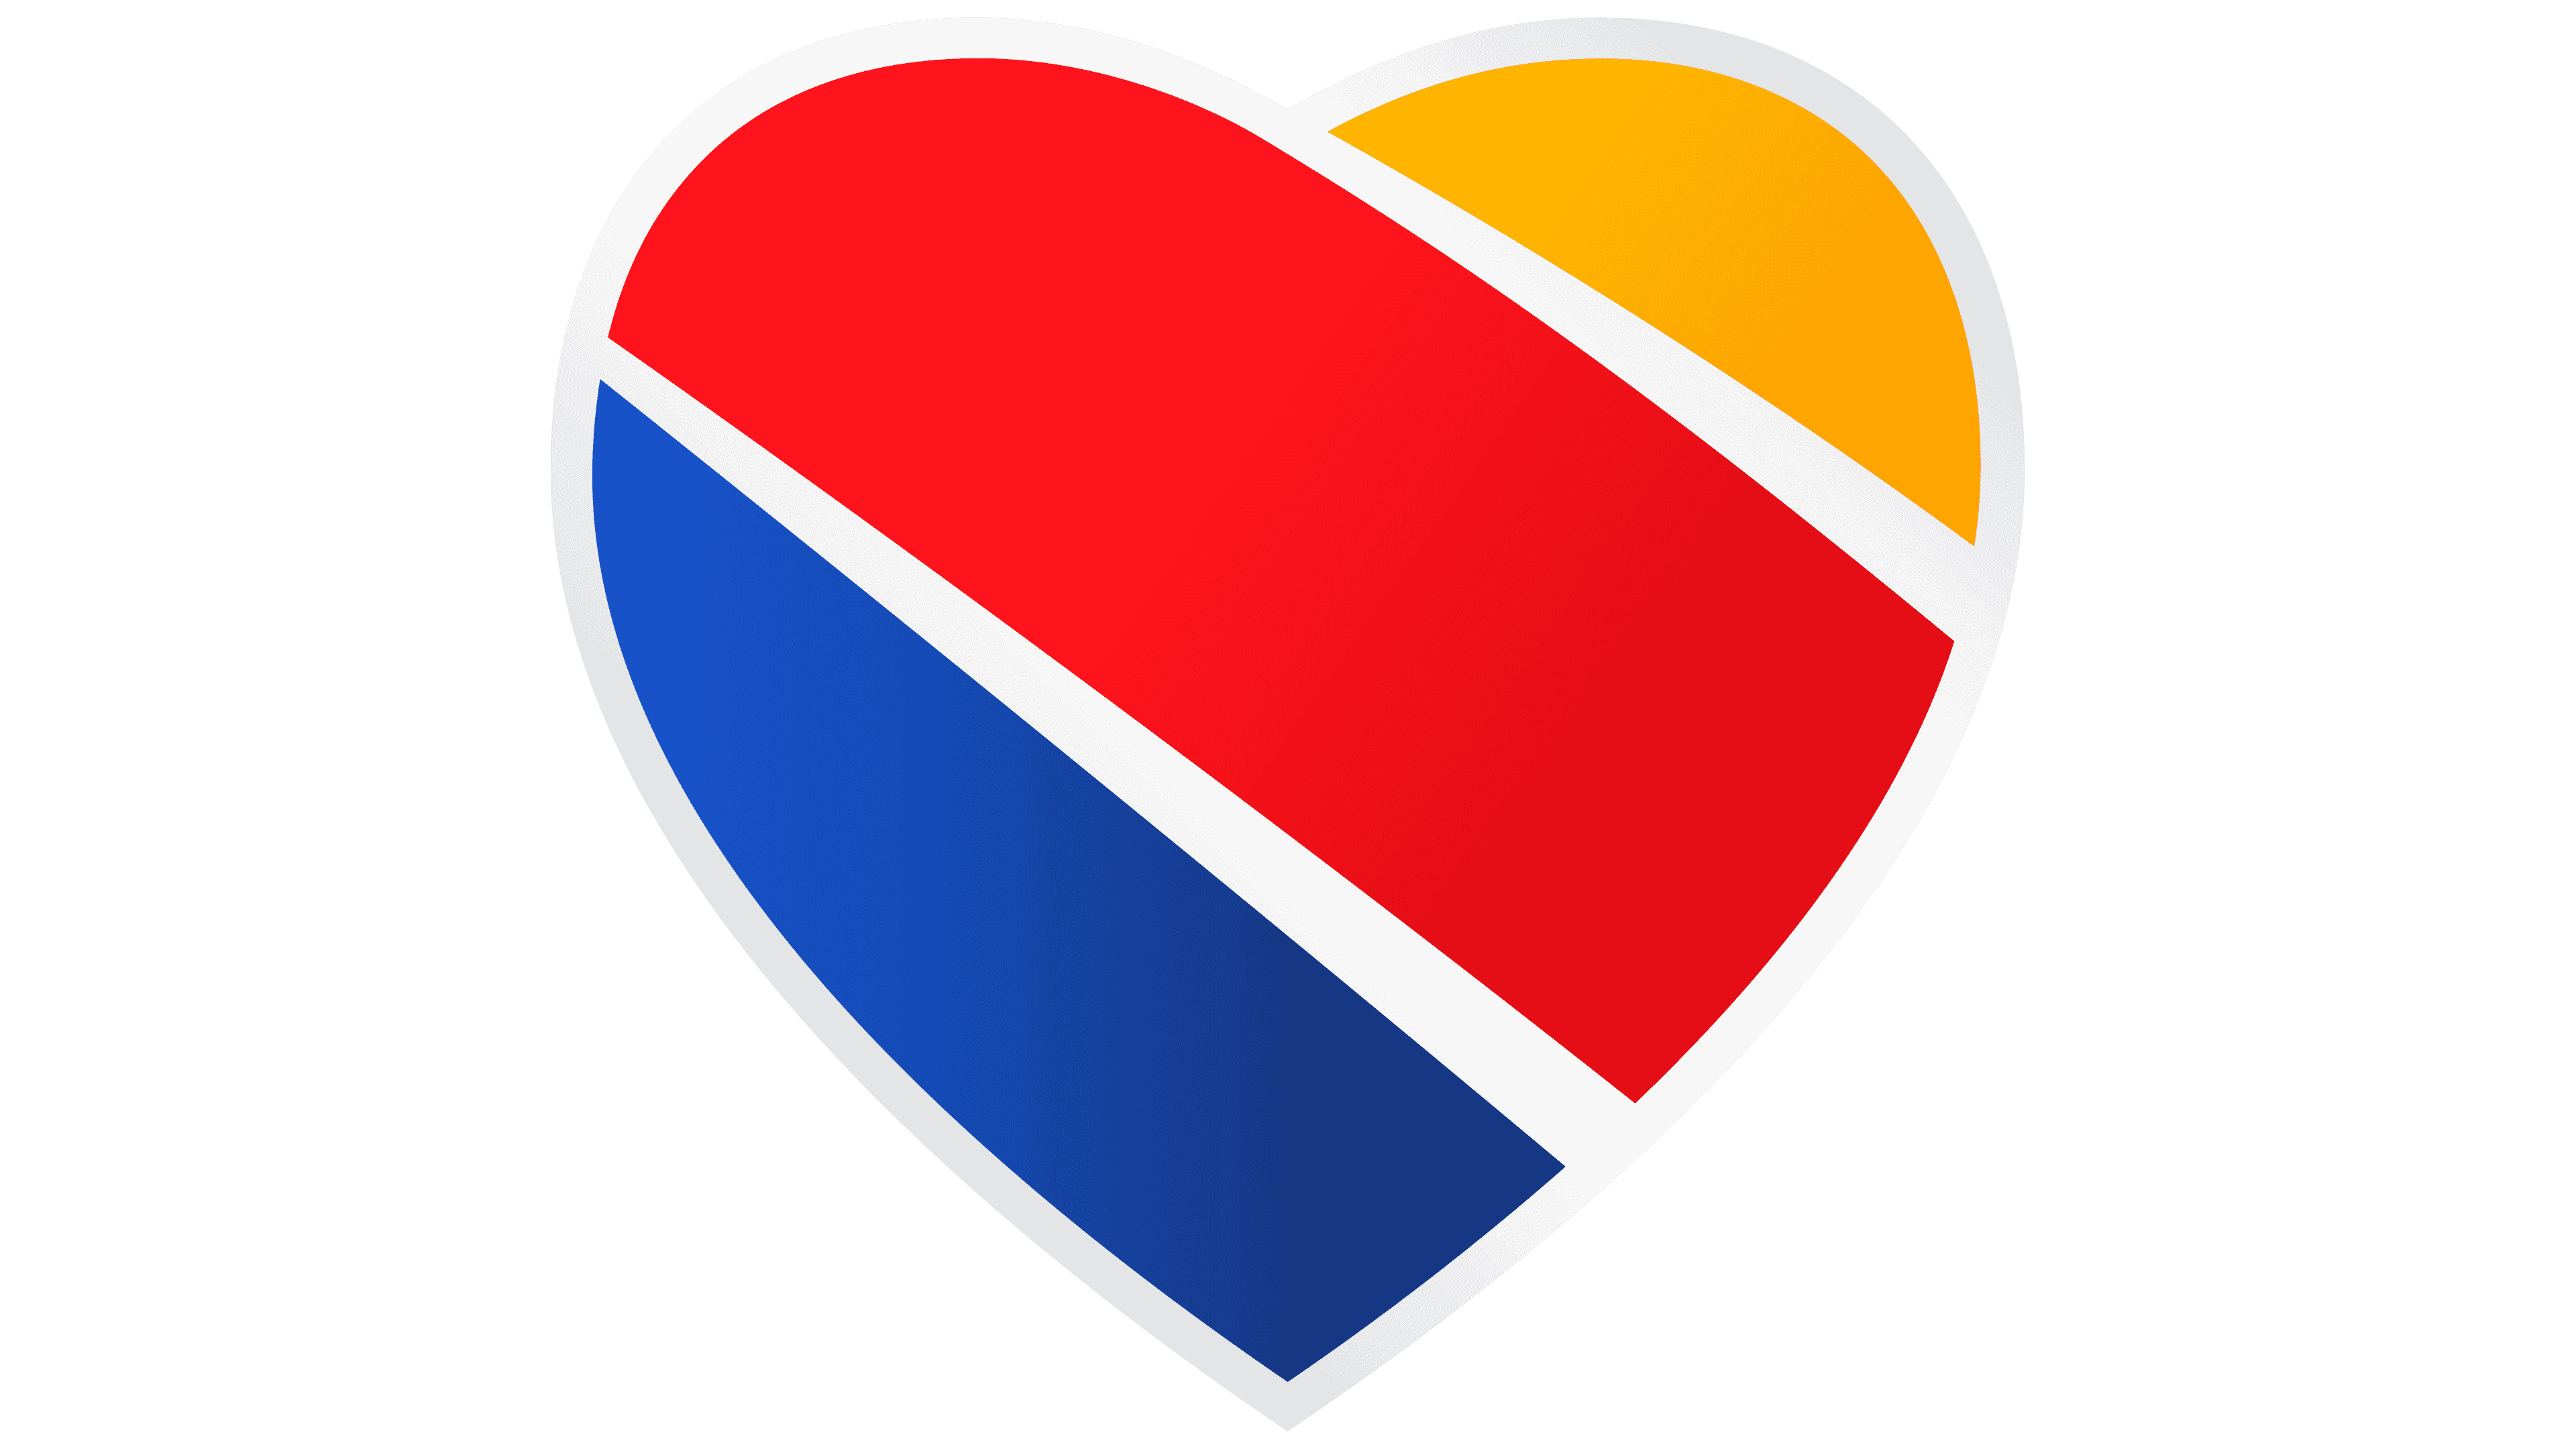 HD wallpaper, Logo And Symbol, 3840X2160 4K Desktop, Southwest Airlines, Brand Identity, Meaning And History, Desktop 4K Southwest Airlines Wallpaper